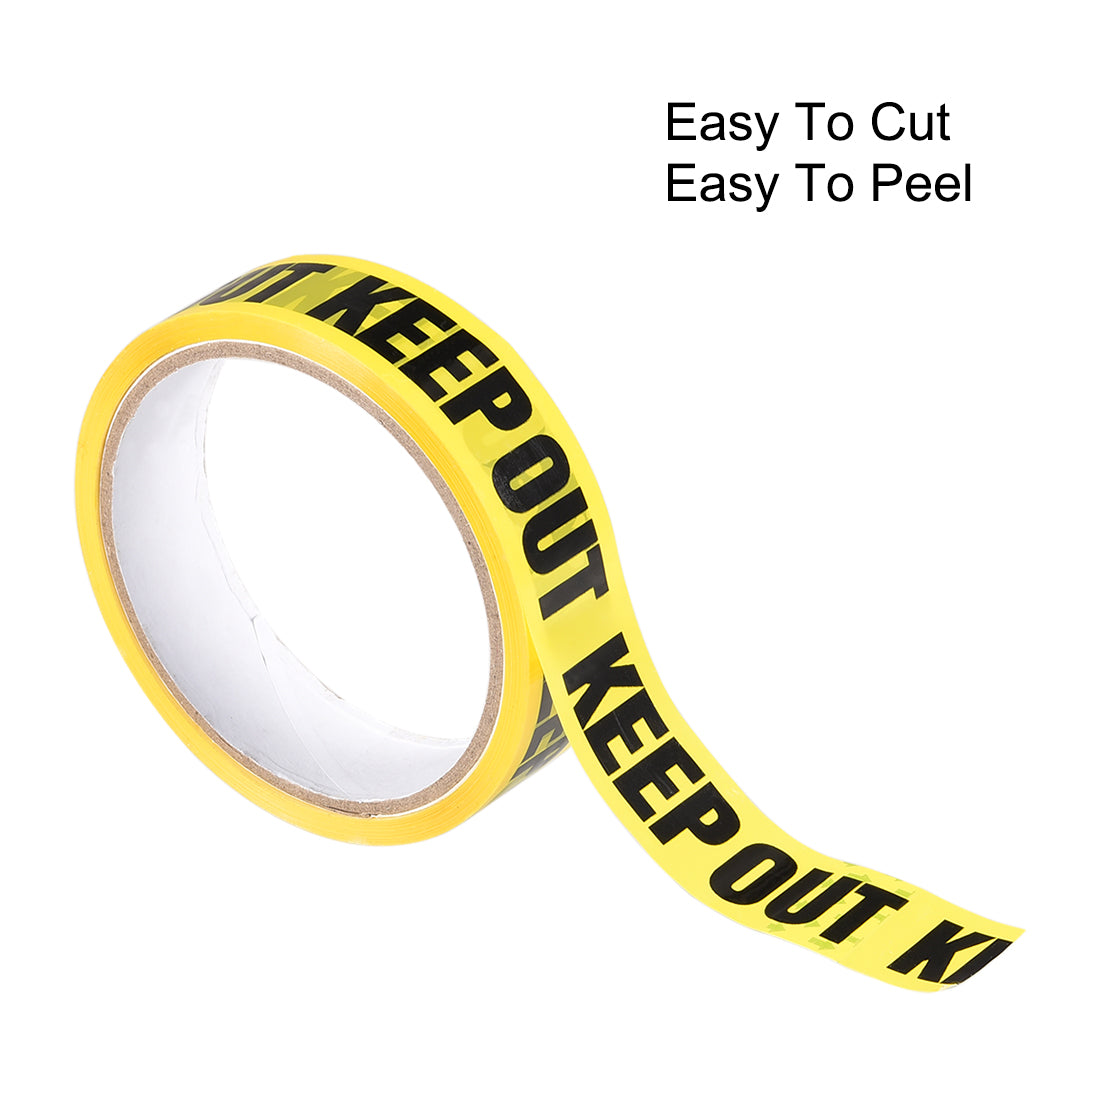 uxcell Uxcell Caution Warning Stripe Sticker Adhesive Tape KEEP OUT Marking, 82 Ft x 1 Inch(LxW), Yellow Black for Workplace Wet Floor Caution